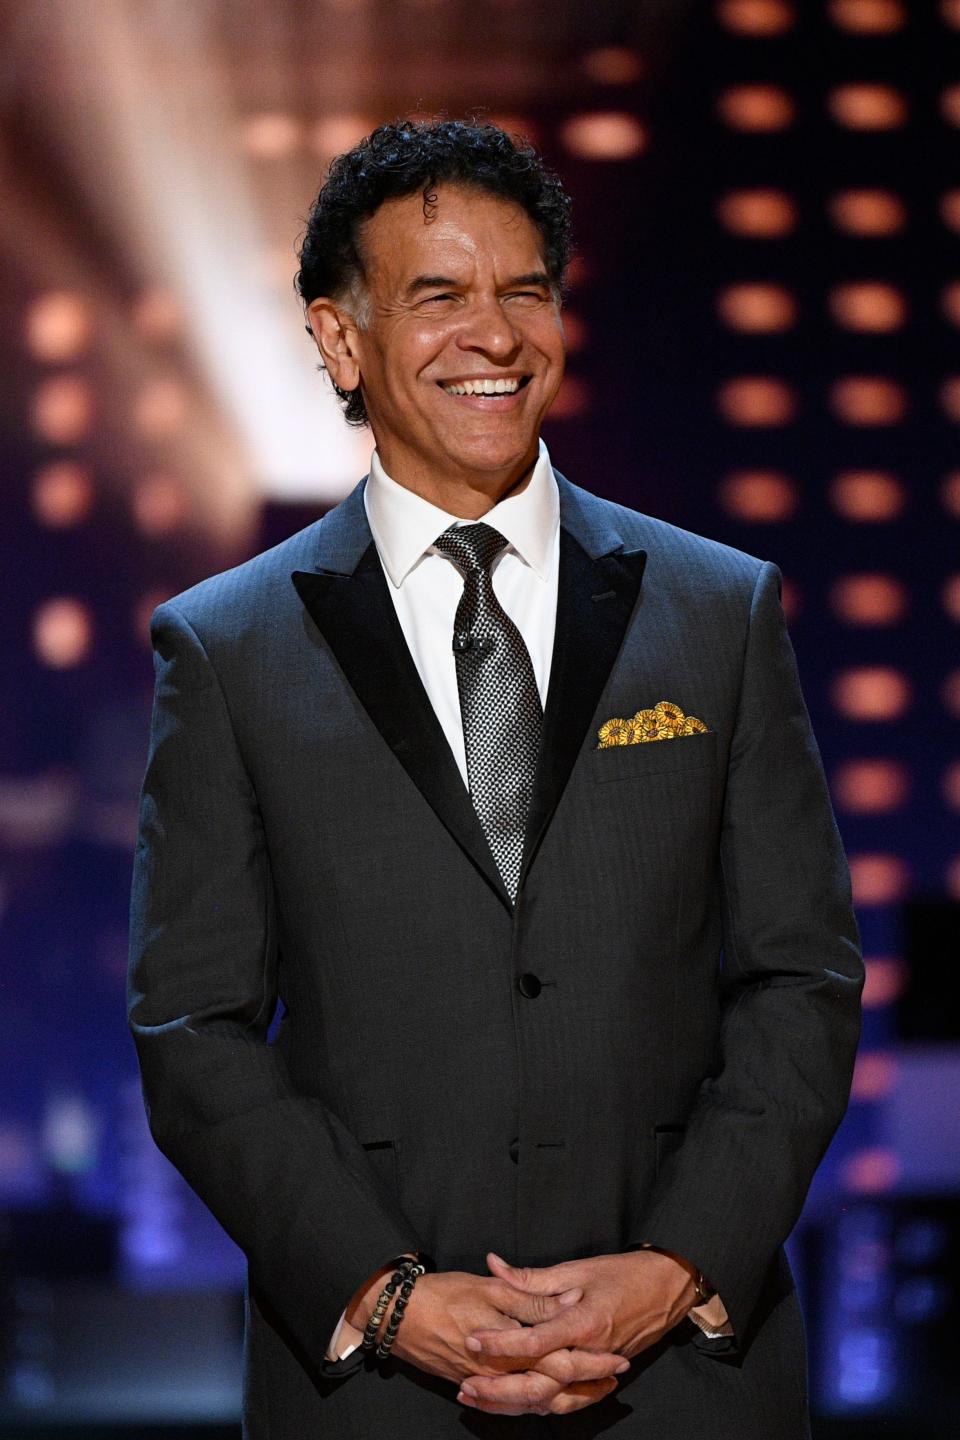 Brian Stokes Mitchell, seen here at the 2019 Tony Awards, will perform at the State Theatre's benefit gala on Saturday, May 7.